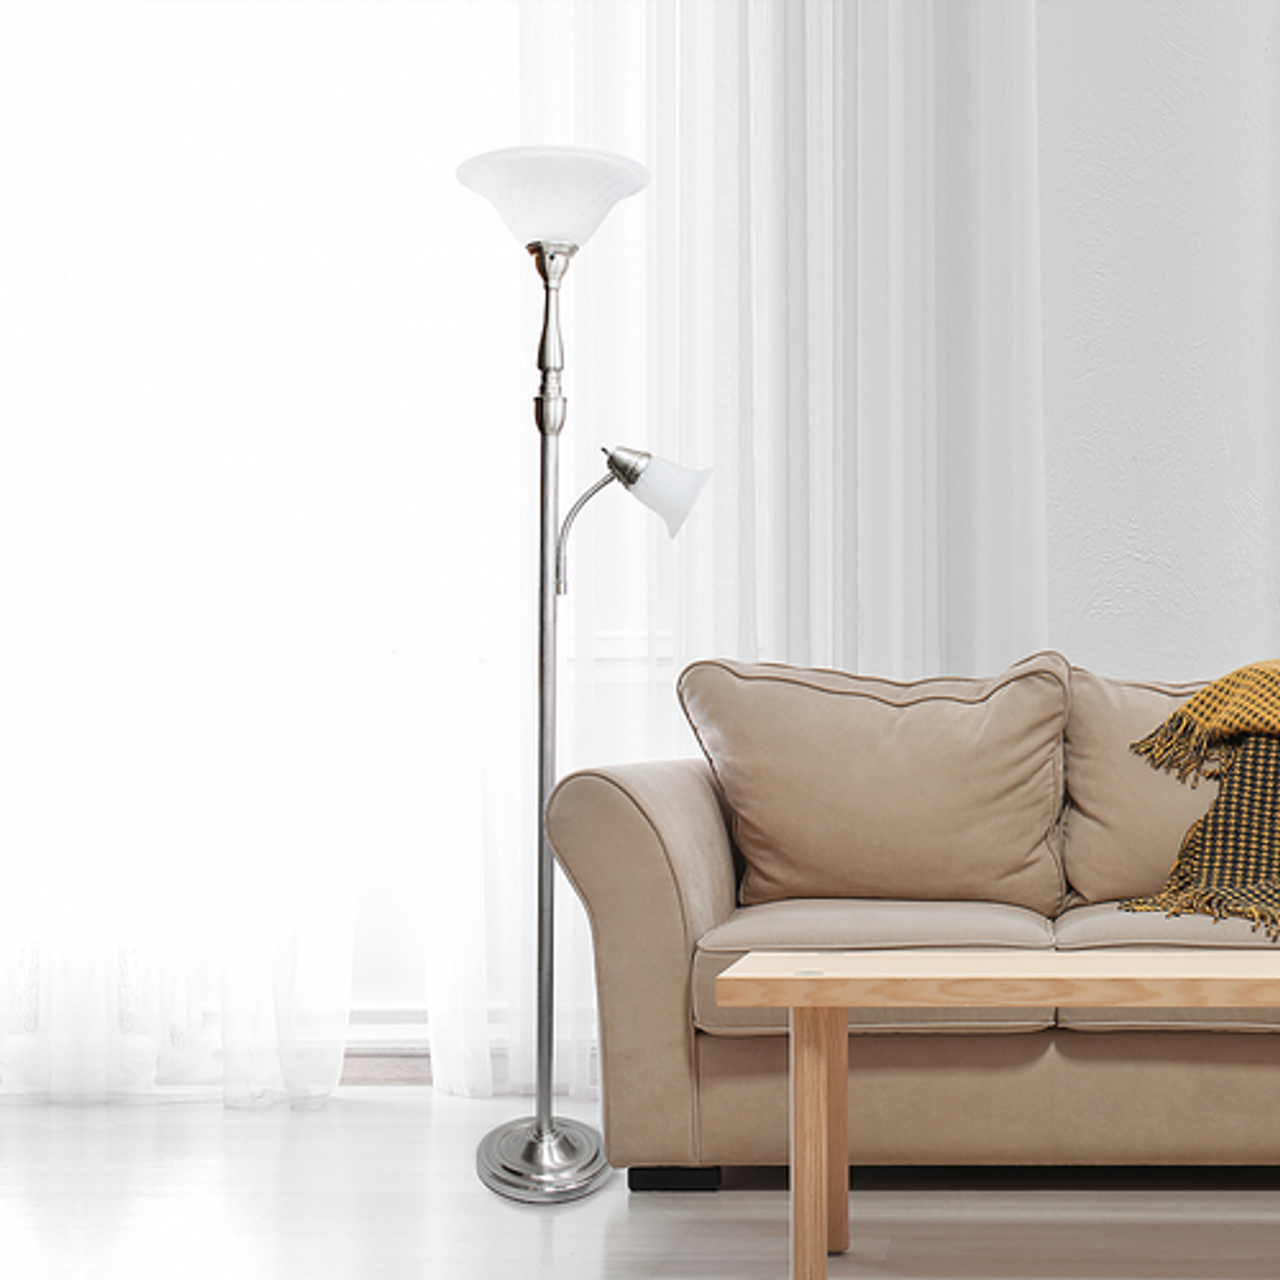 Lalia Home Torchiere Floor Lamp with Reading Light and Marble Glass Shades, Brushed Nickel - BRUSHED NICKEL/WHITE SHADES